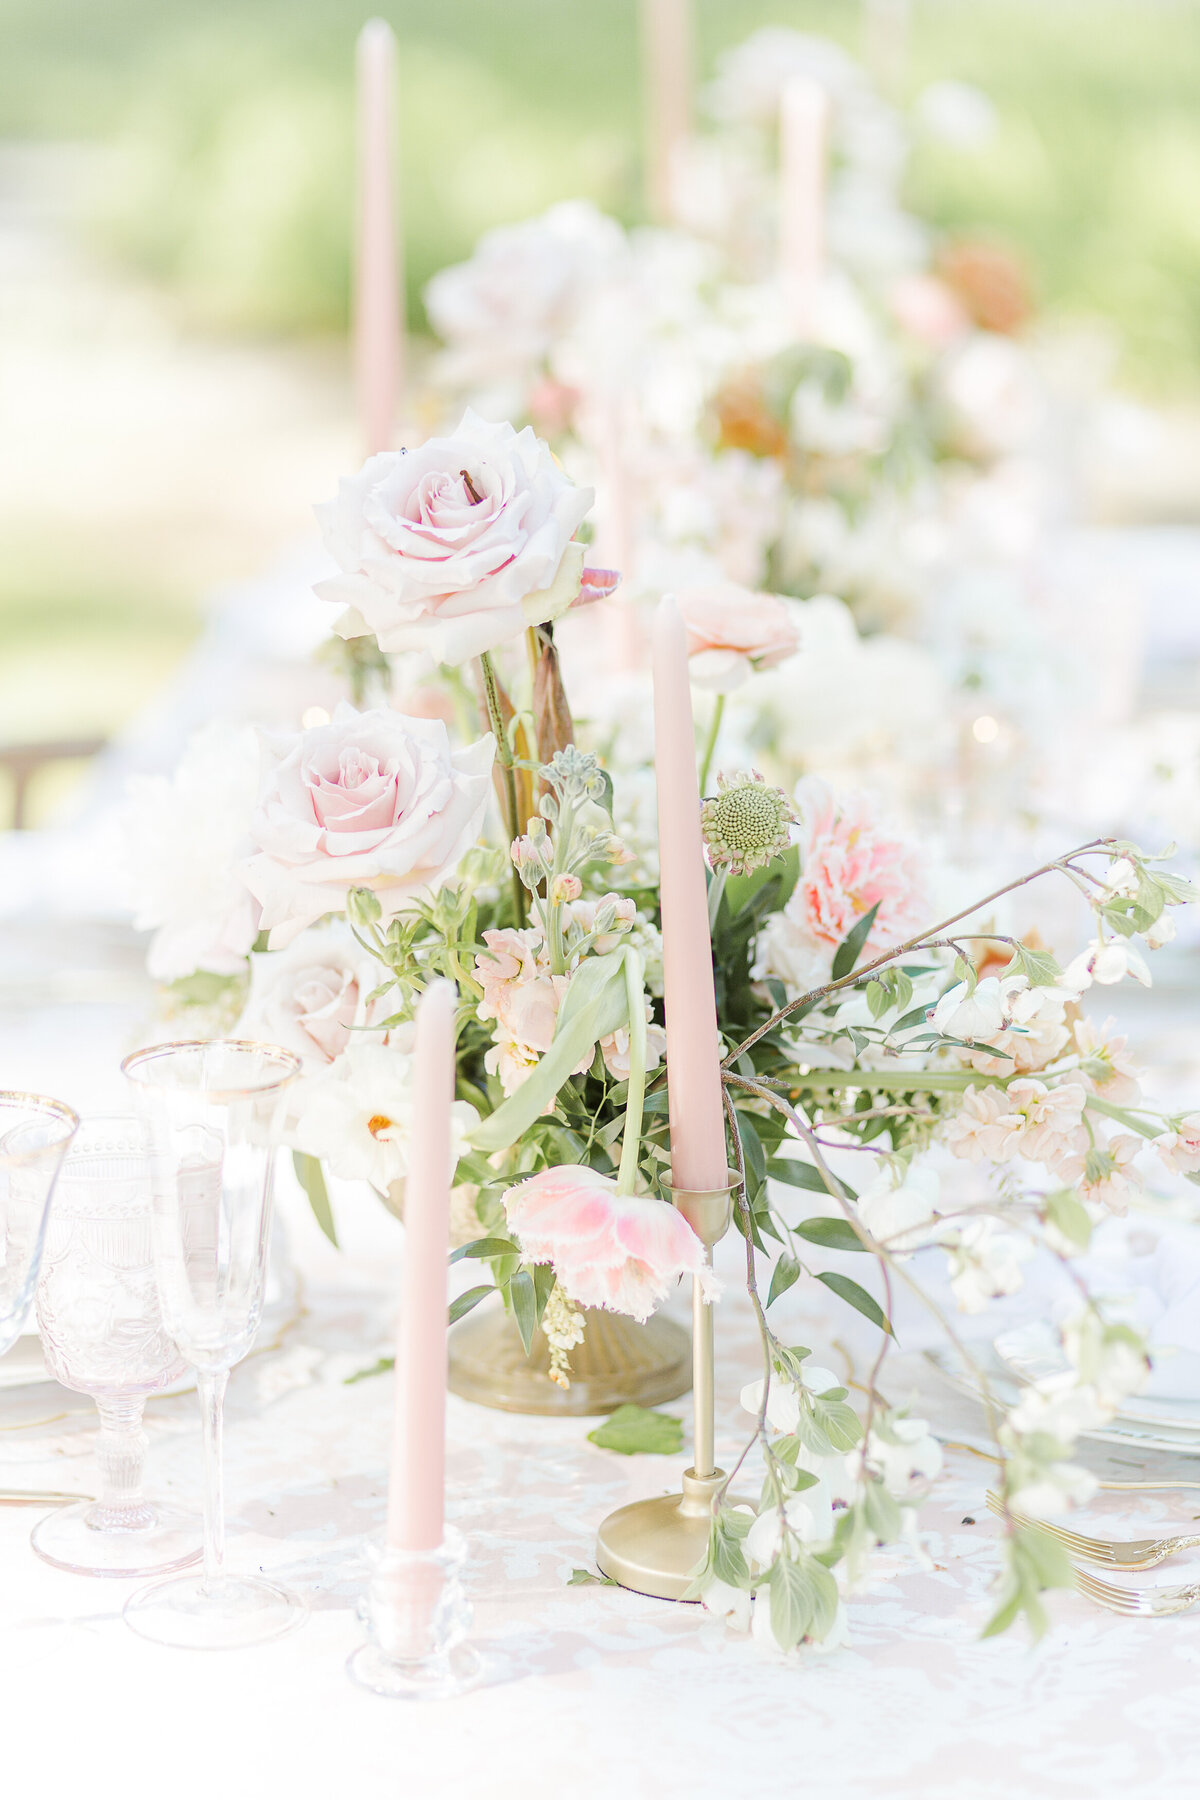 Detail image of wedding table setting Image is focused on blush florals and soft gold candlestics and flatware. Captured by best Massachusetts wedding photographer Lia Rose Weddings